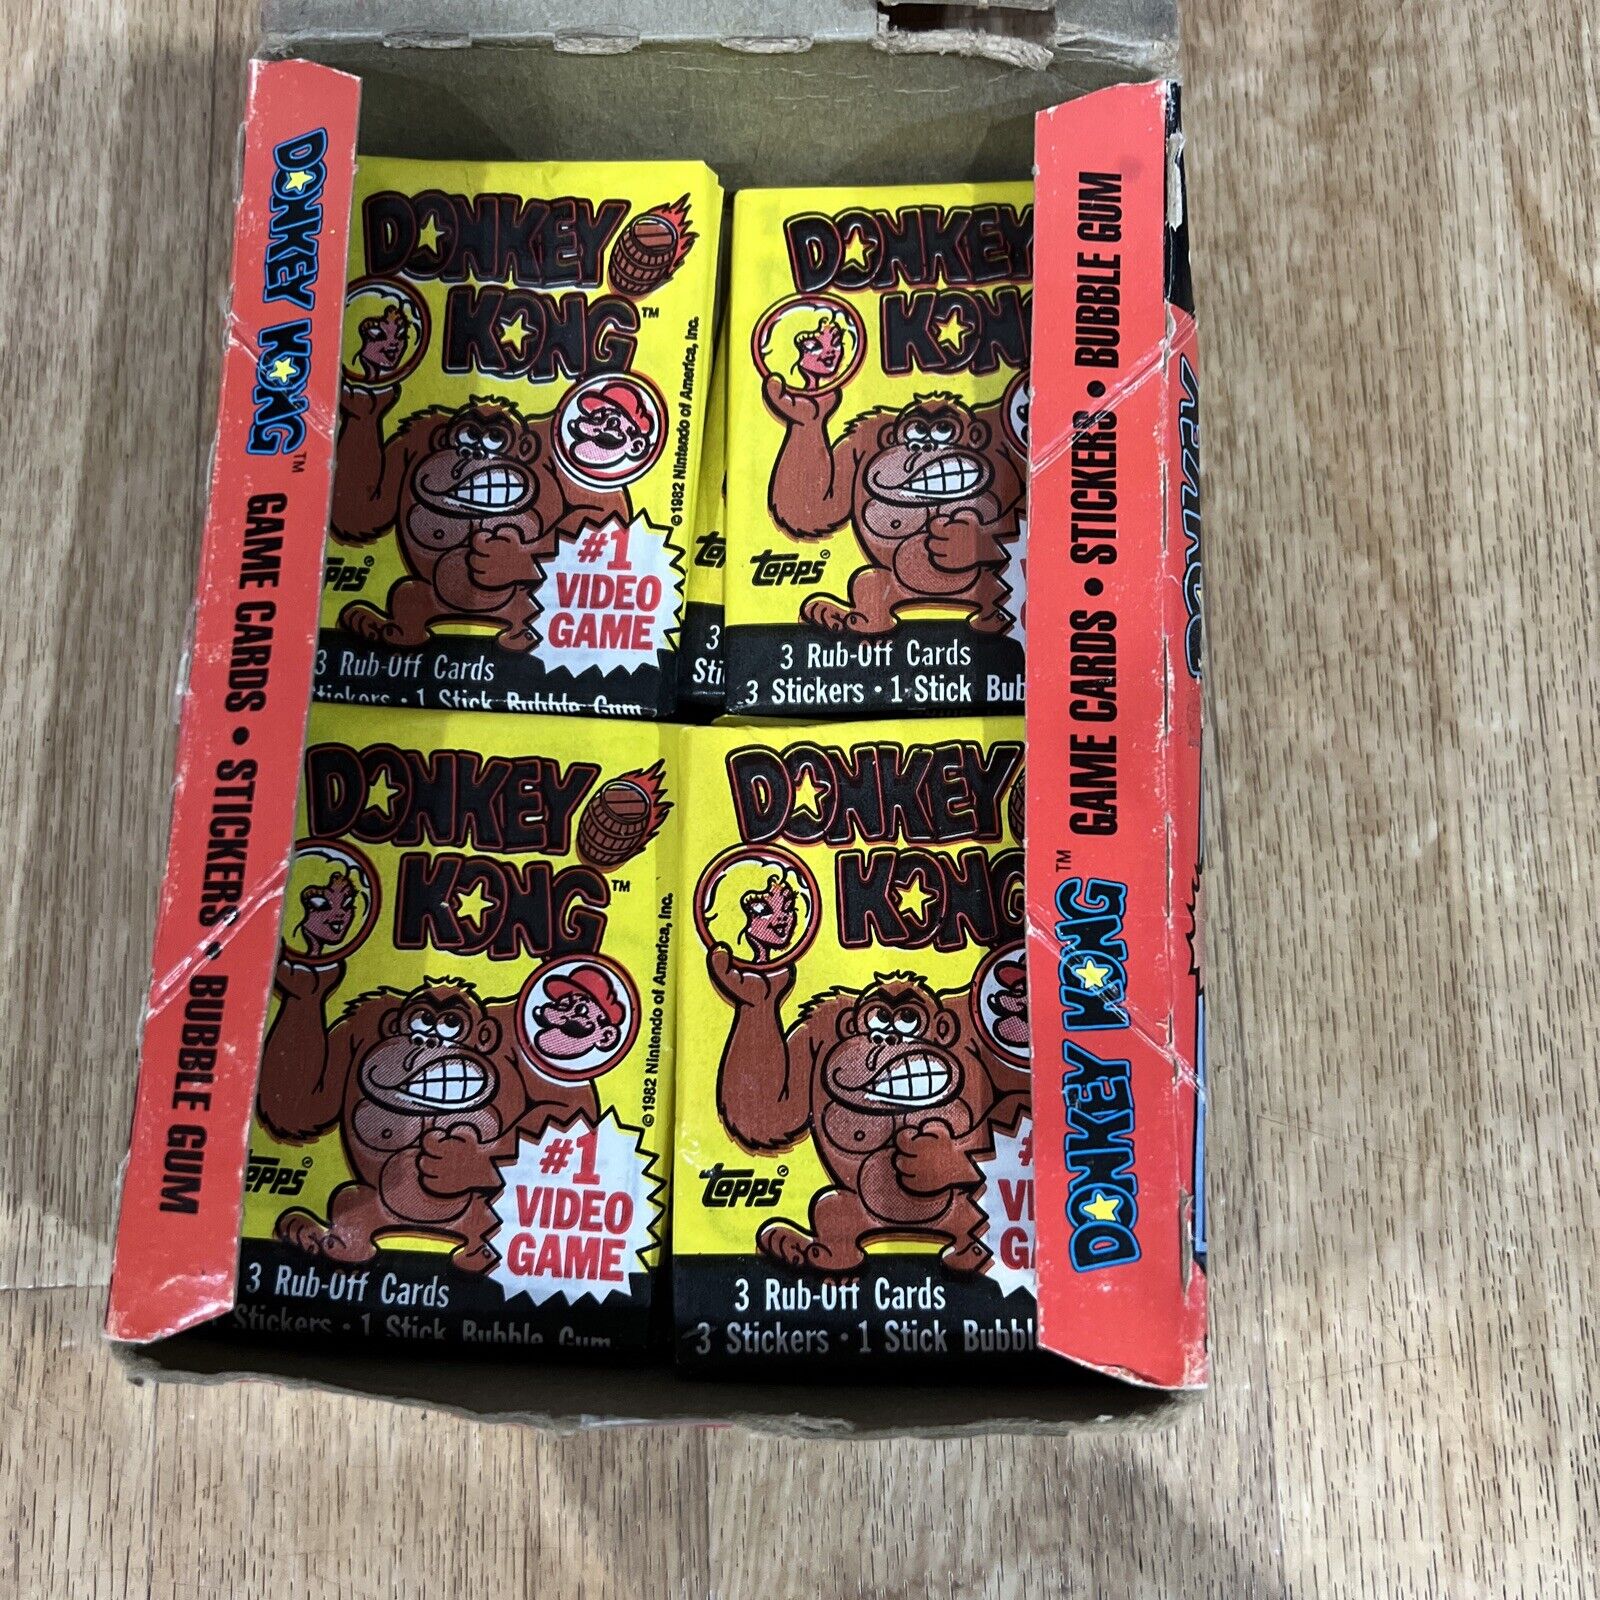 1982 Topps - DONKEY KONG (Video Game) - Unopened Vintage Wax Pack combine ship